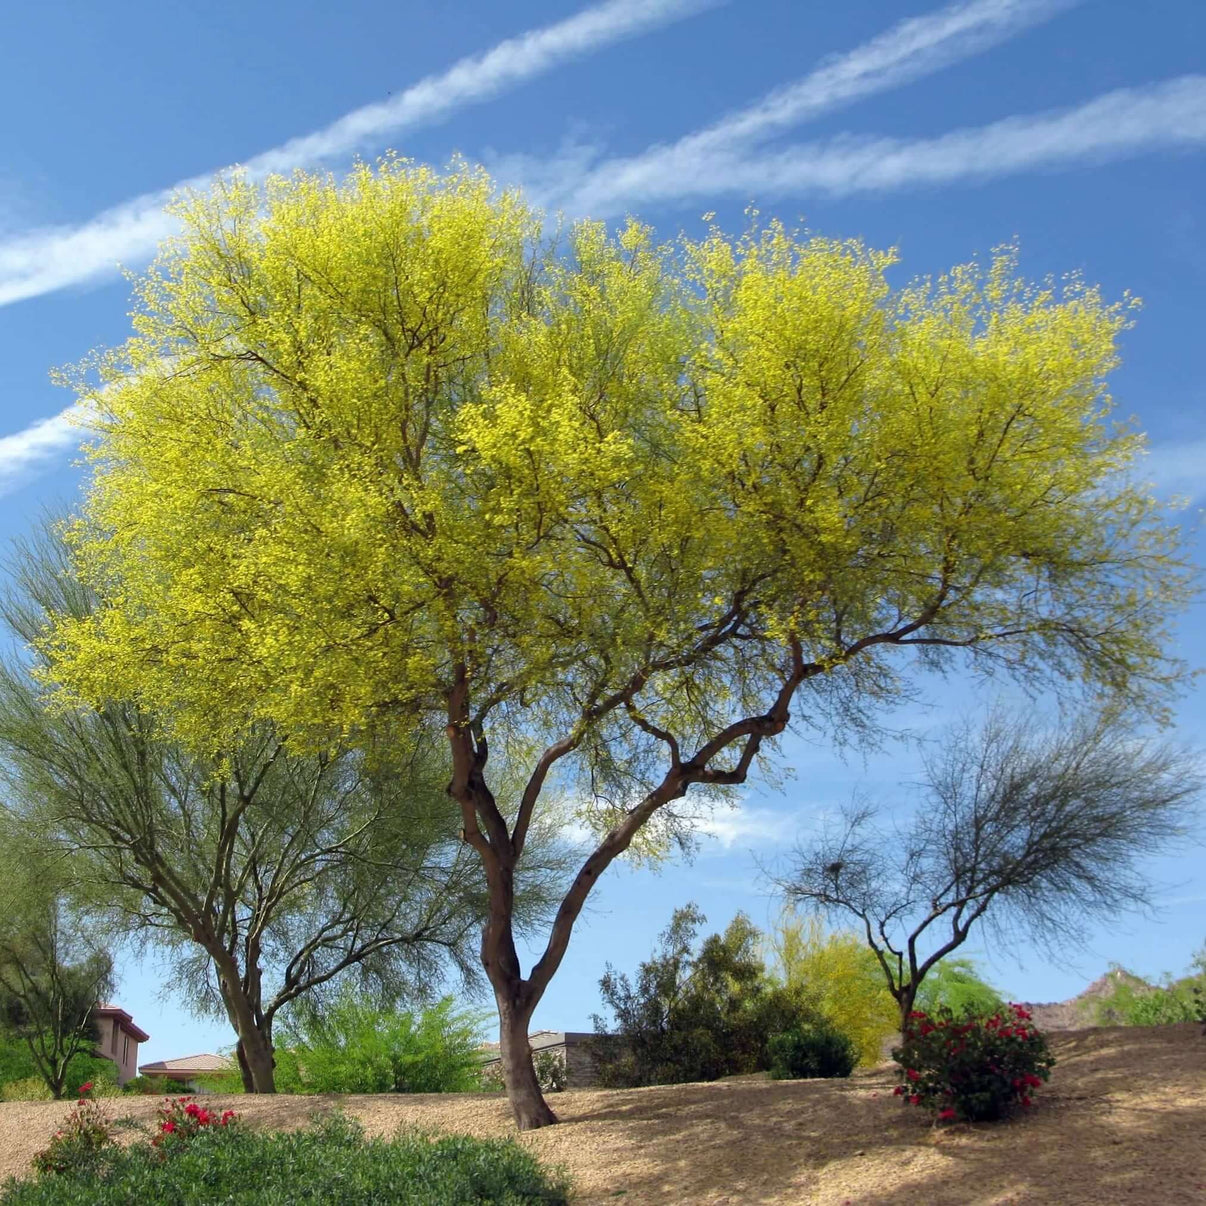 A desert museum palo verde tree with yellow leaves.